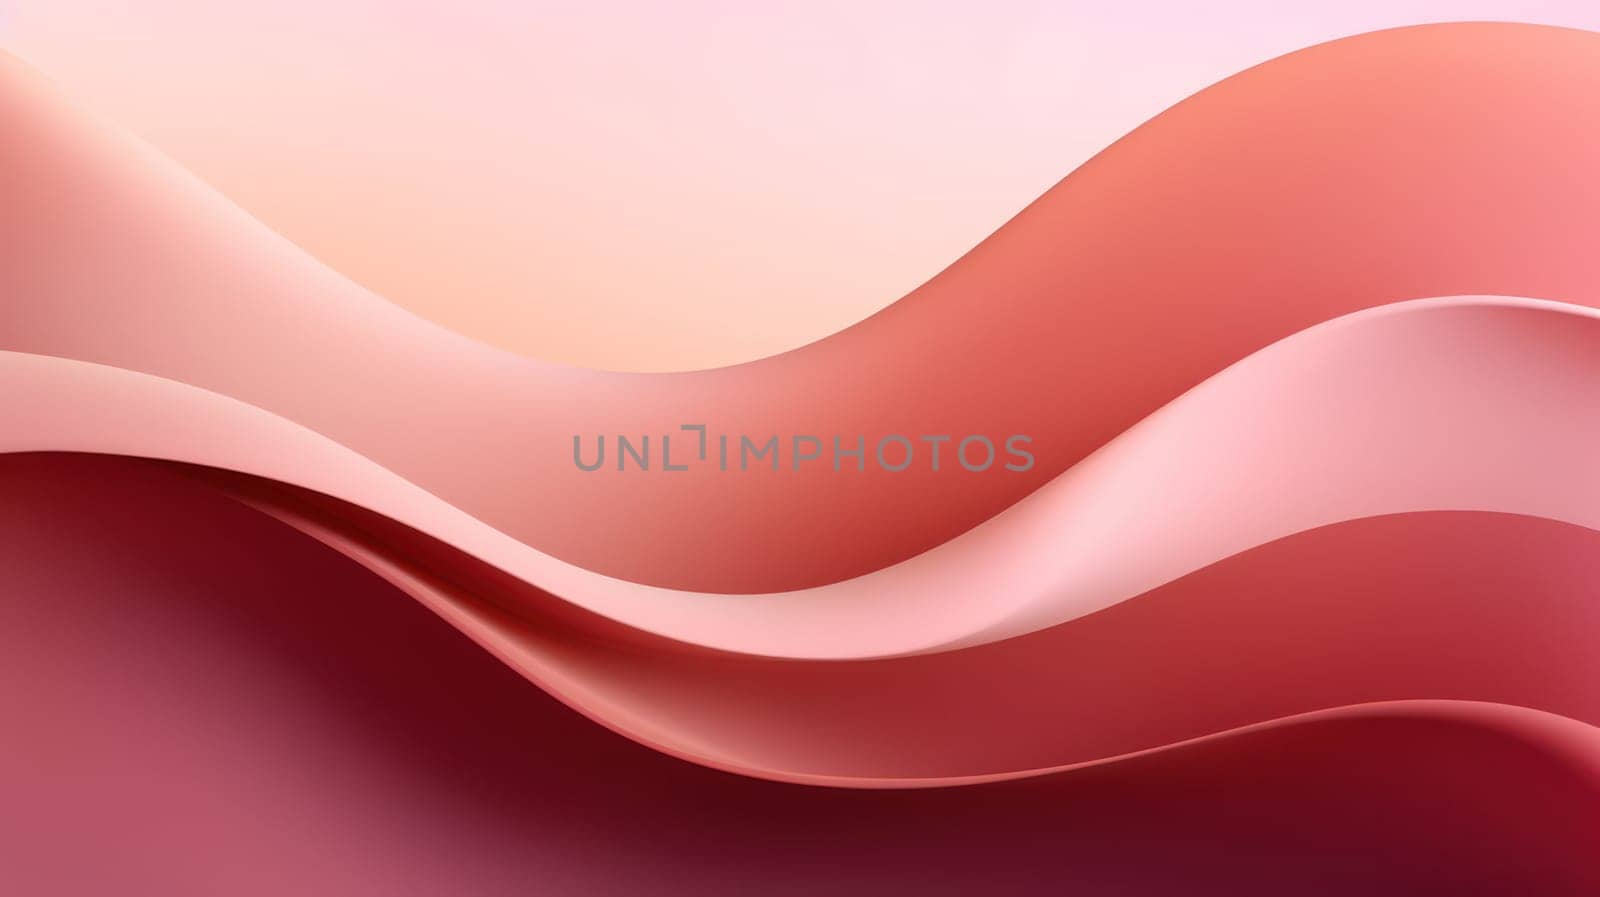 Abstract Design: Bright Curves and Waves - A Modern Illustration of Gradient Pink Wallpaper, with a Fluid and Dynamic Motion by Vichizh